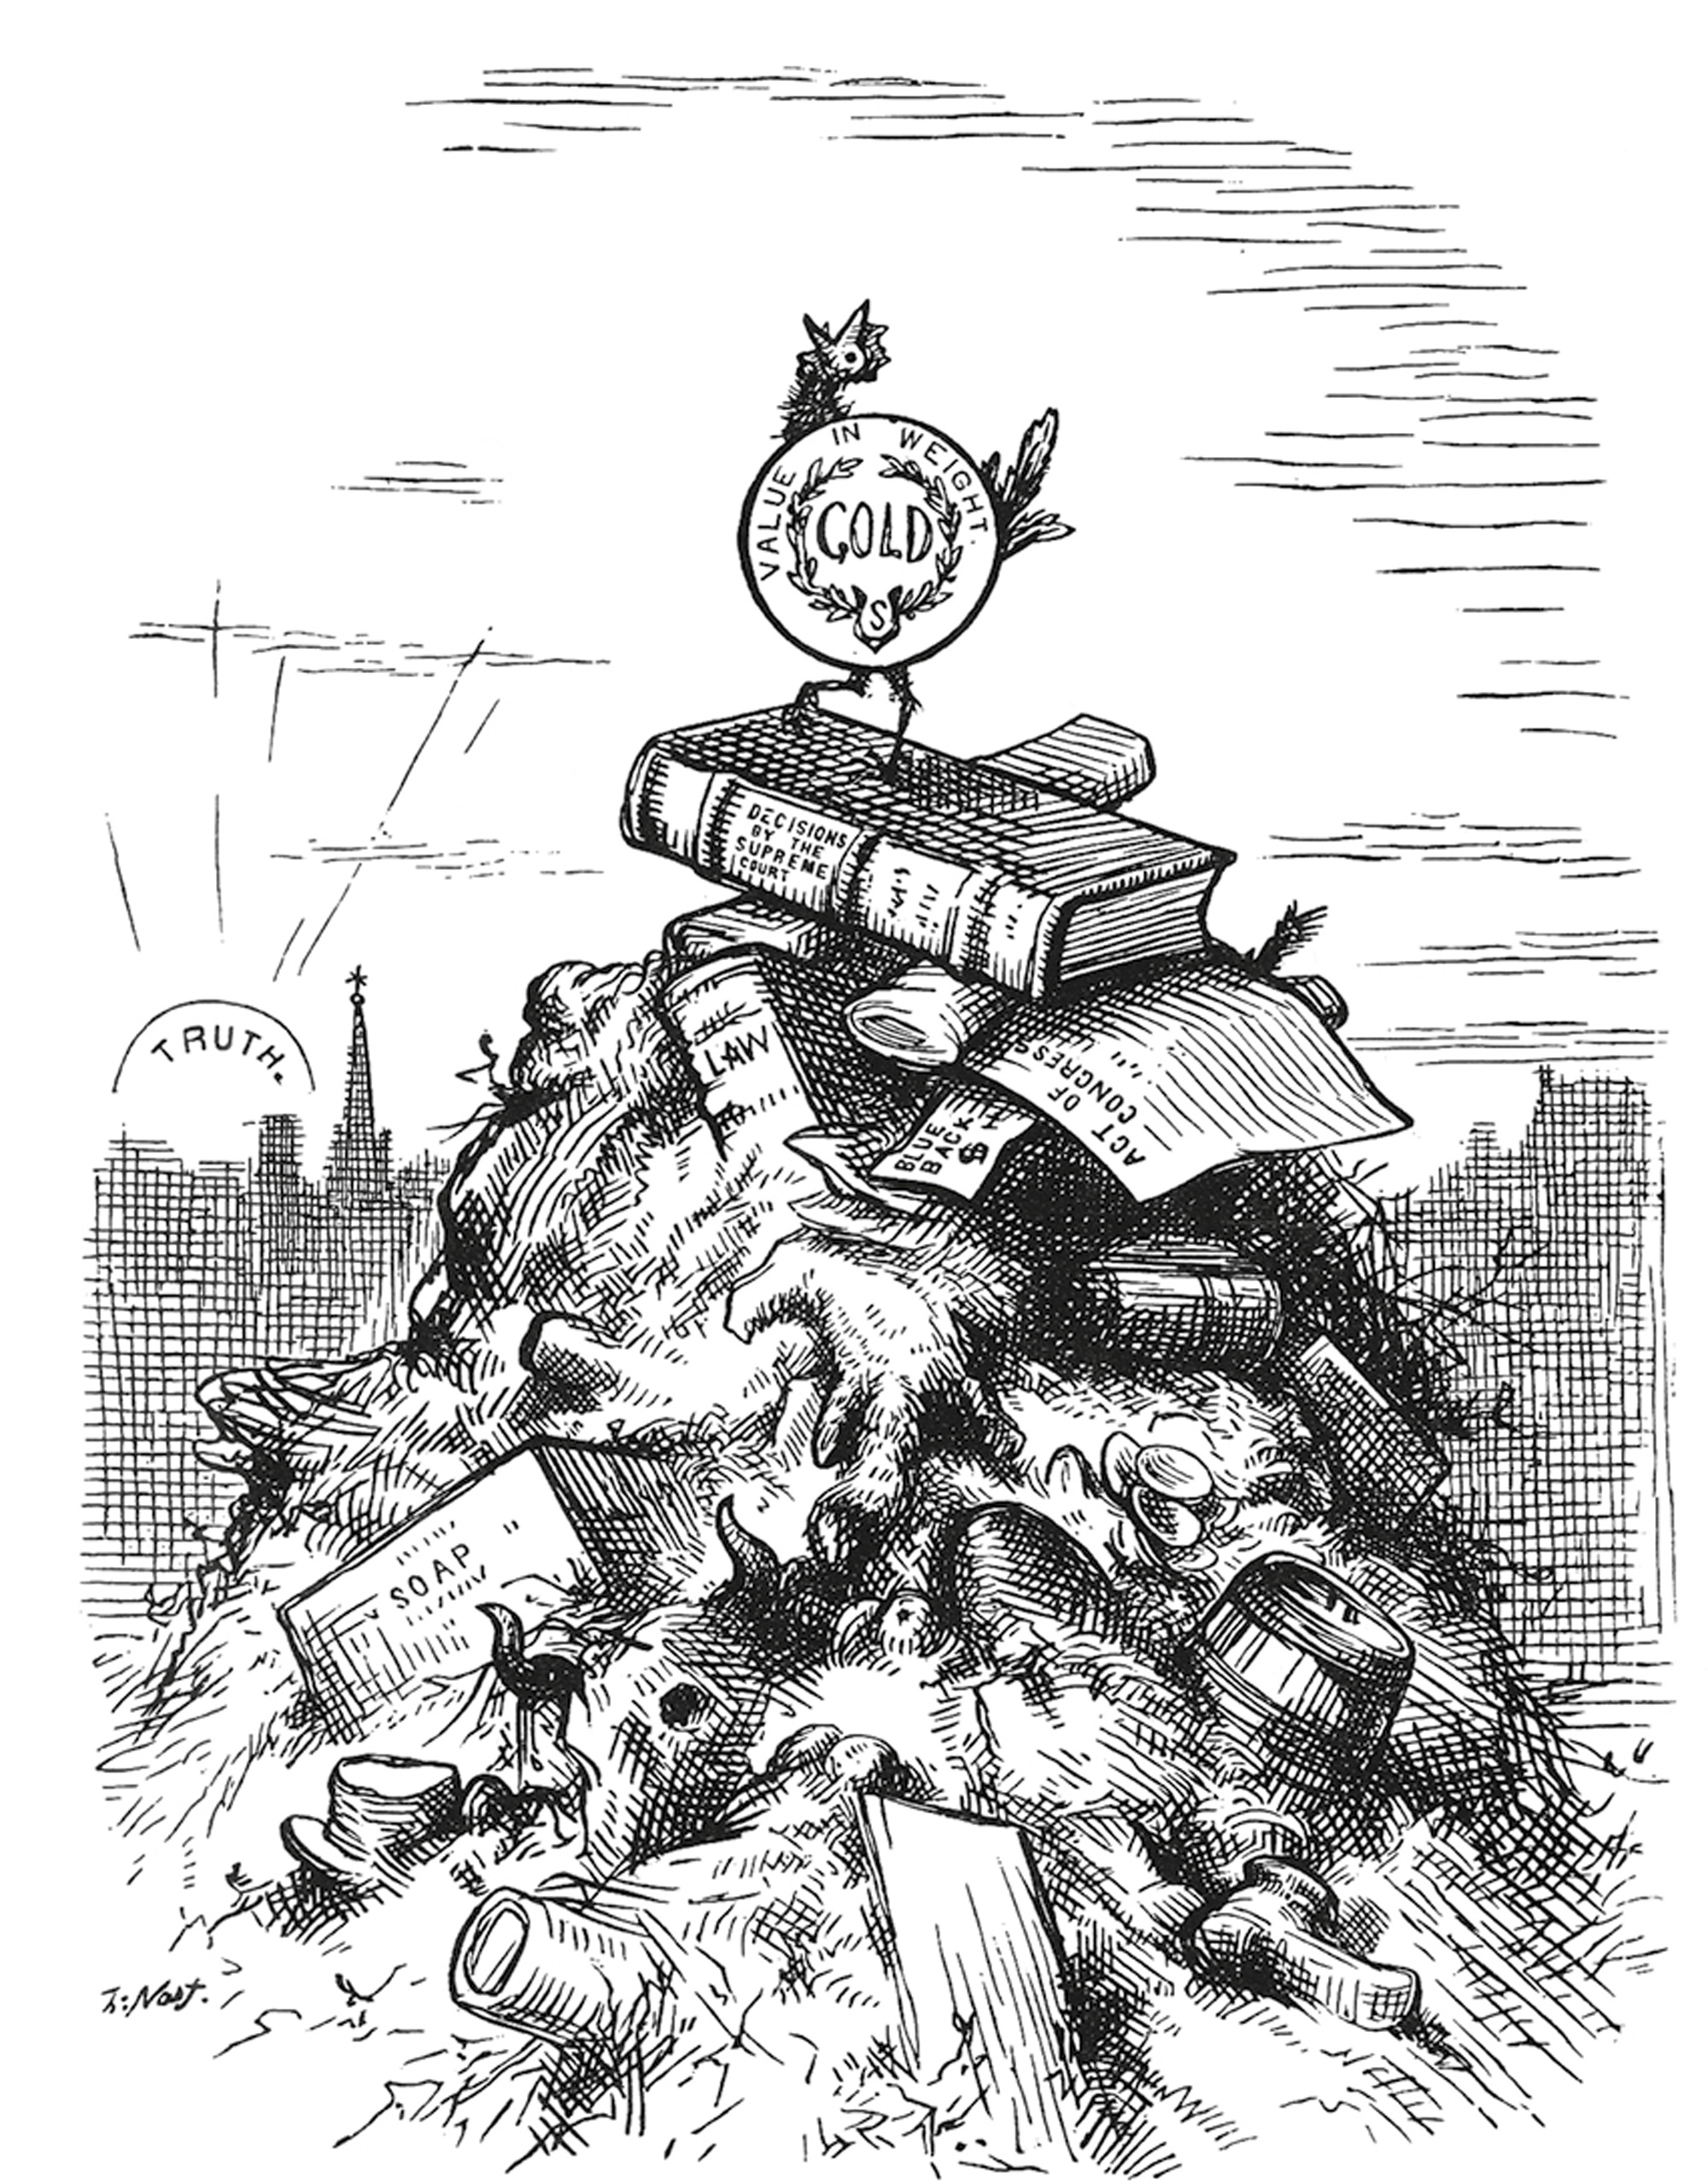 Thomas Nast’s illustration titled “Survival of the Fittest,” the cover for David Wells’s “Robinson Crusoe’s Money.”